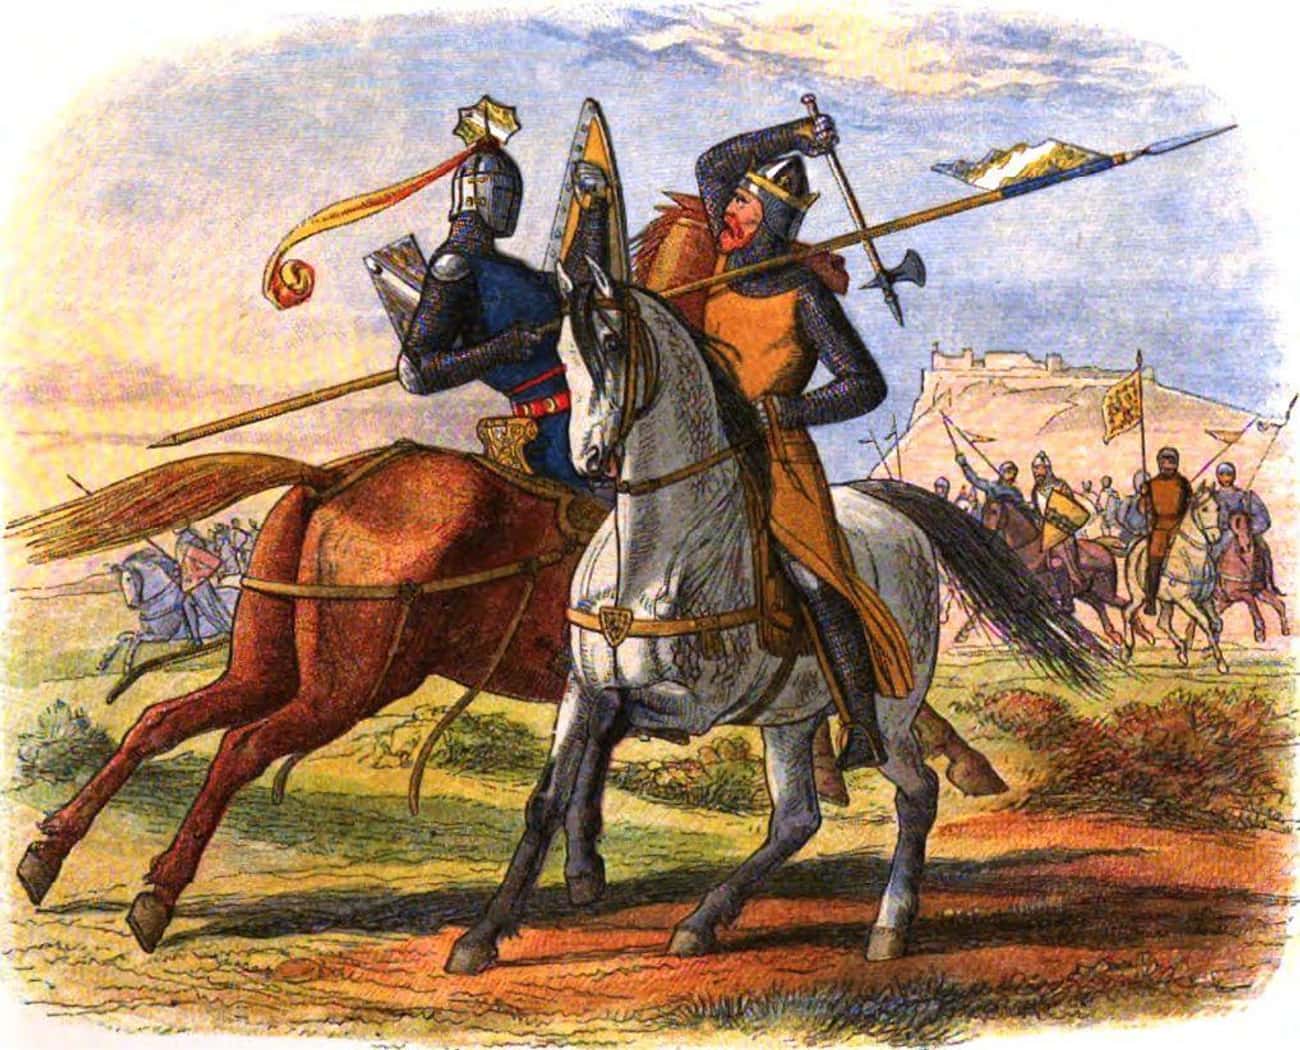 Robert The Bruce Kicked Off The Battle of Bannockburn By Chopping A Man In Two